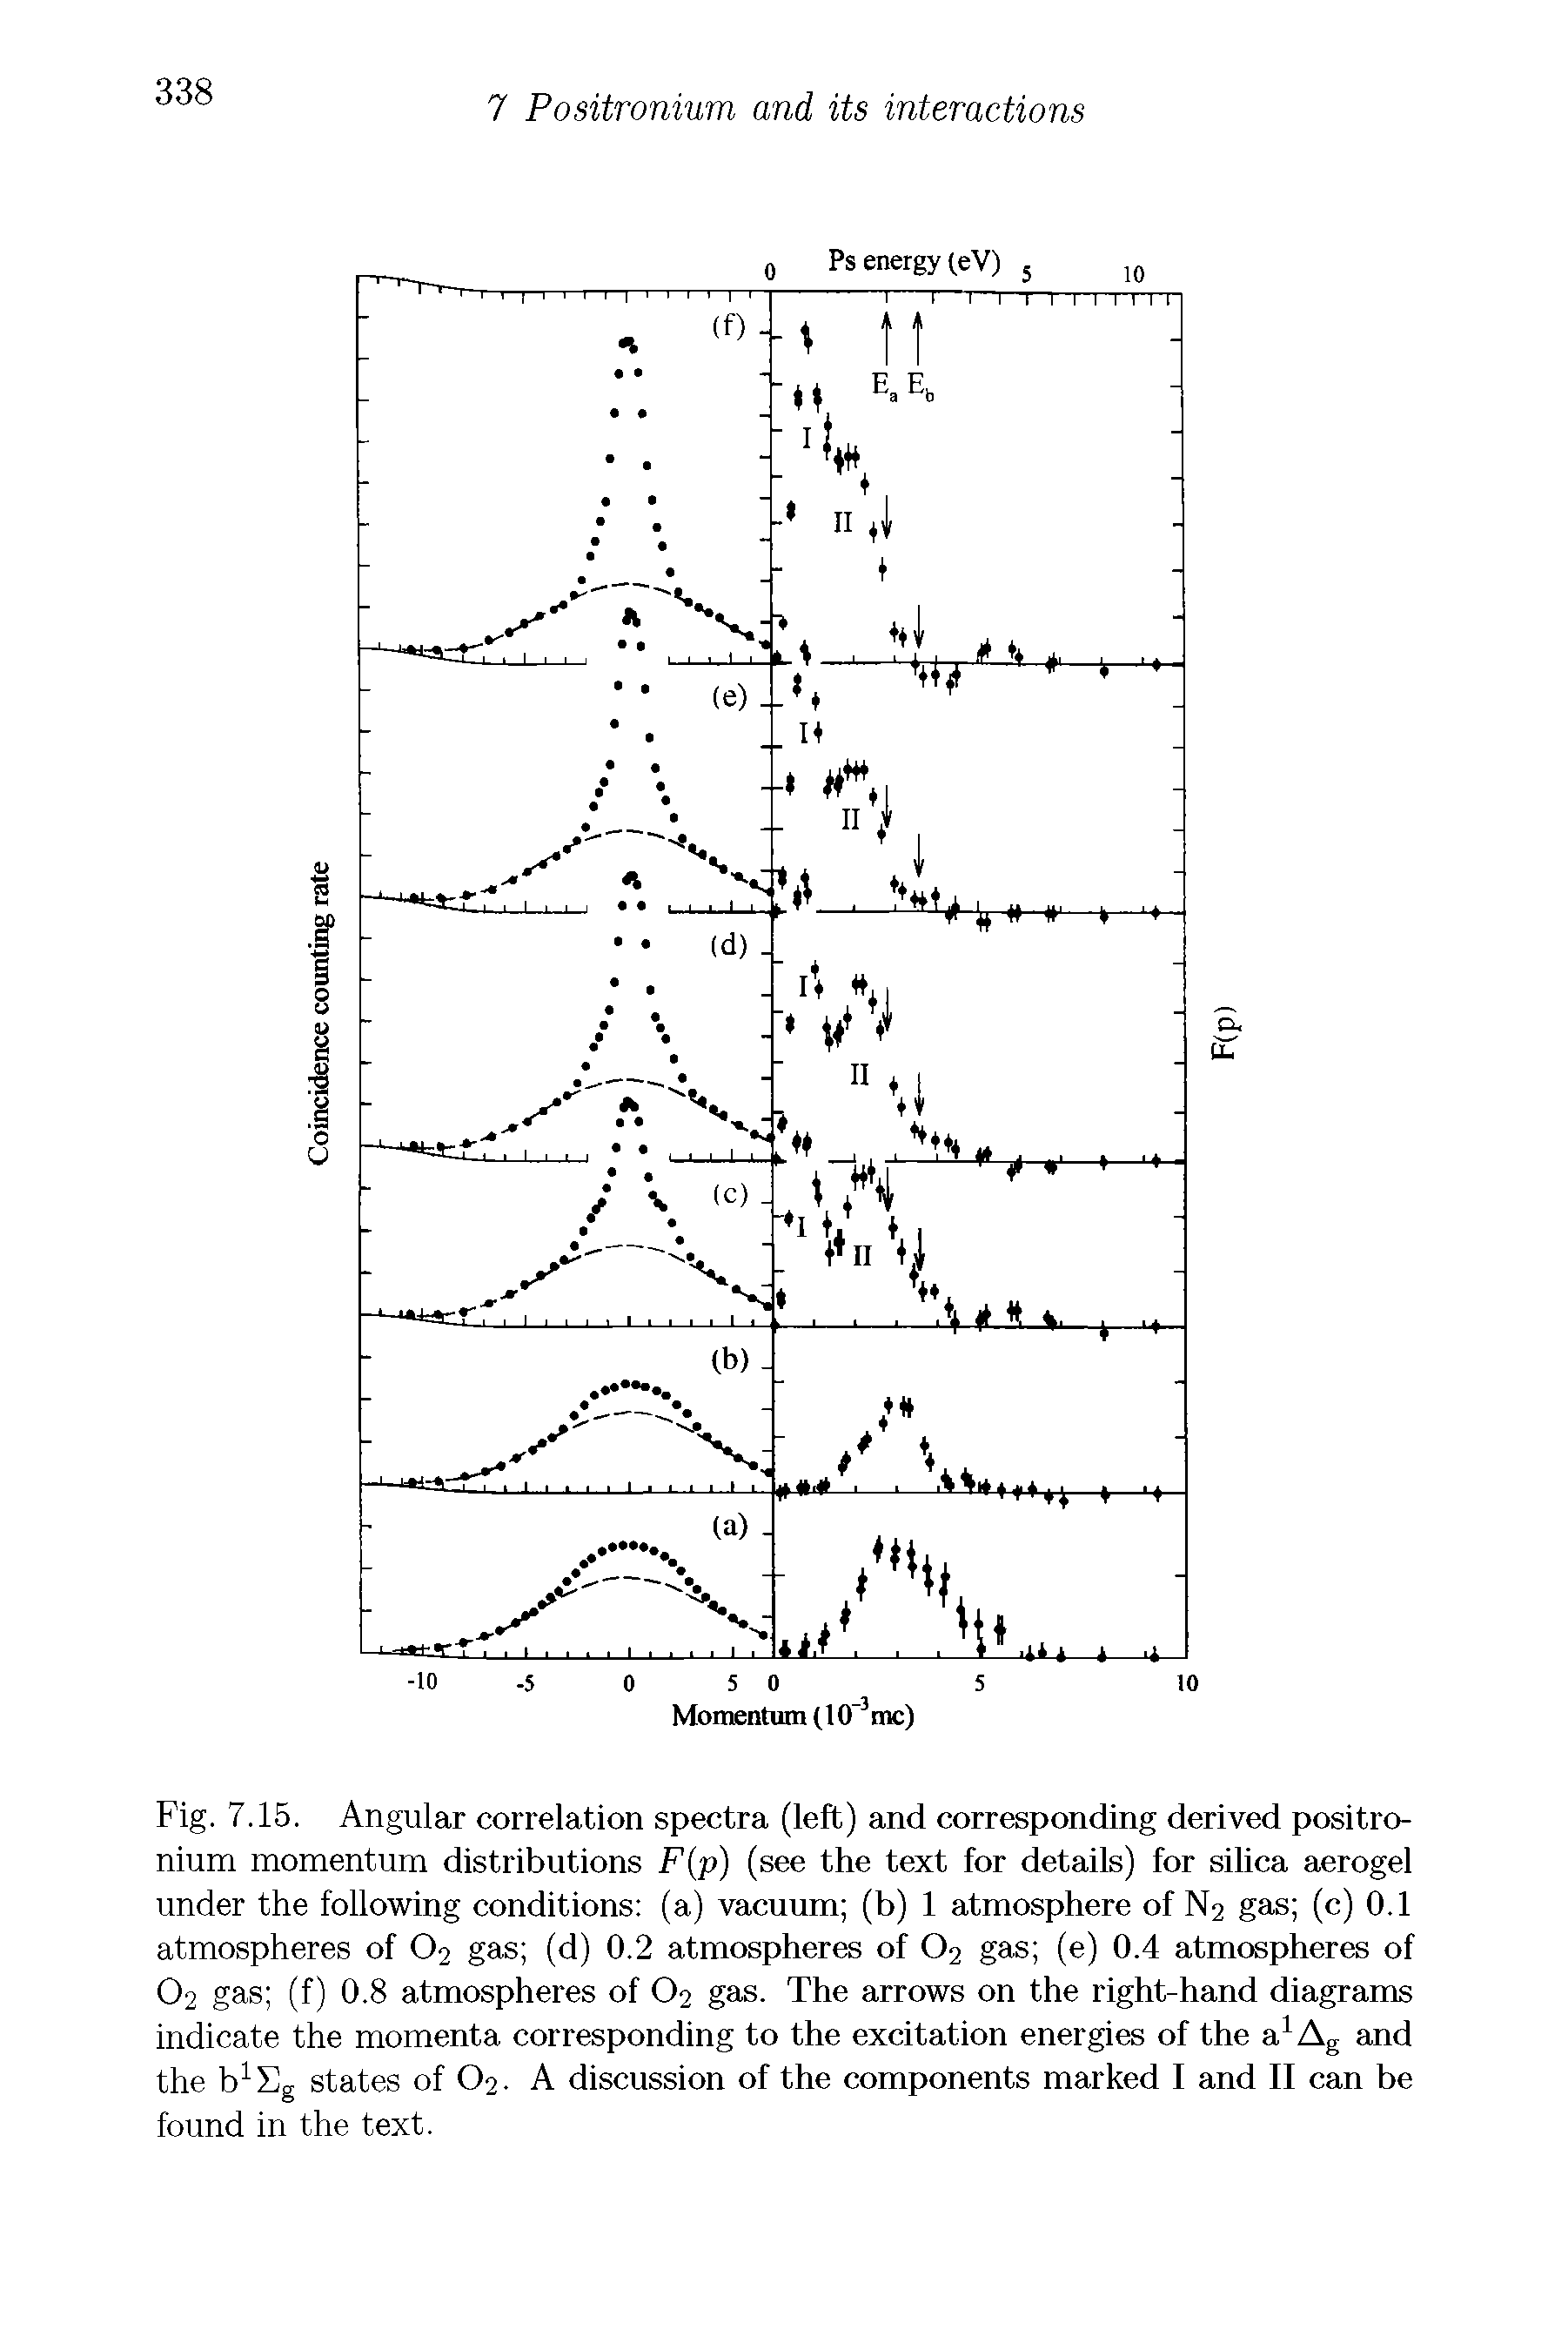 Fig. 7.15. Angular correlation spectra (left) and corresponding derived positronium momentum distributions F(p) (see the text for details) for silica aerogel under the following conditions (a) vacuum (b) 1 atmosphere of N2 gas (c) 0.1 atmospheres of O2 gas (d) 0.2 atmospheres of 02 gas (e) 0.4 atmospheres of O2 gas (f) 0.8 atmospheres of O2 gas. The arrows on the right-hand diagrams indicate the momenta corresponding to the excitation energies of the a1Ag and the b1Eg states of O2. A discussion of the components marked I and II can be found in the text.